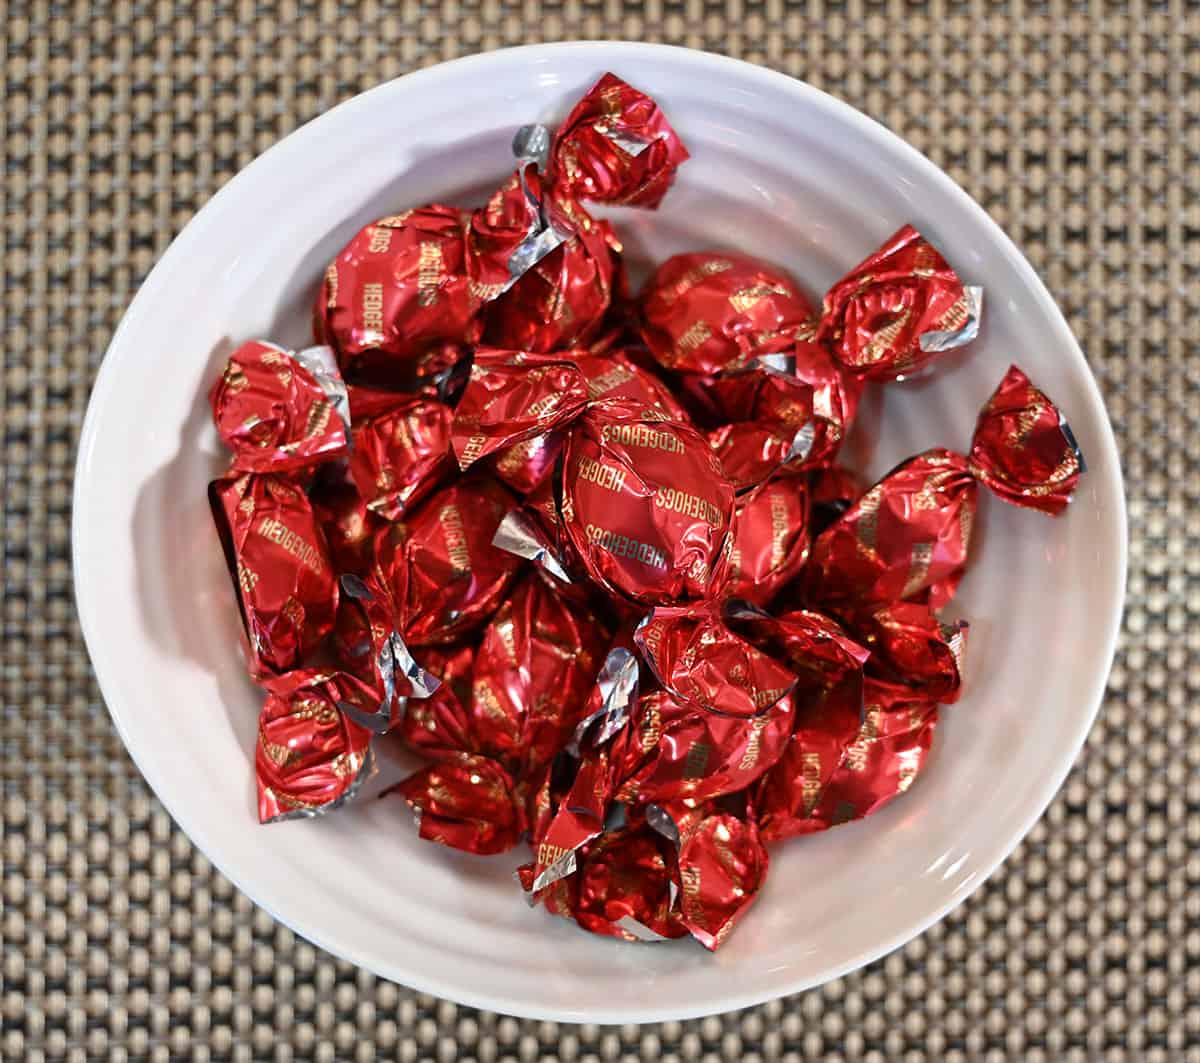 Top down image of a bowl of wrapped chocolates.